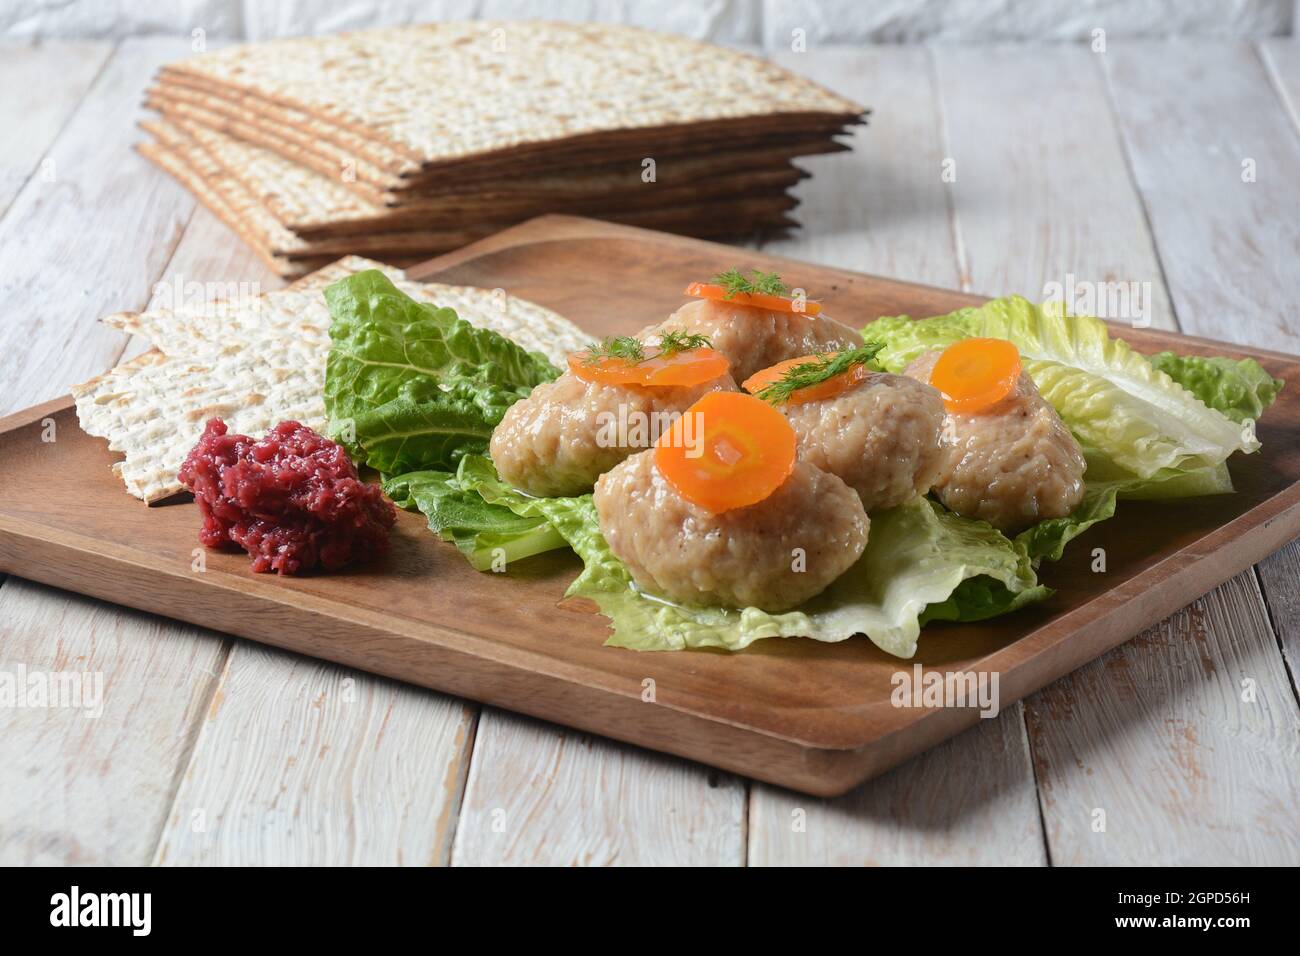 Passover traditional Jewish food- gefilte fish with carrots, lettuce, horse radish and matzah. Passover celebration concept Stock Photo